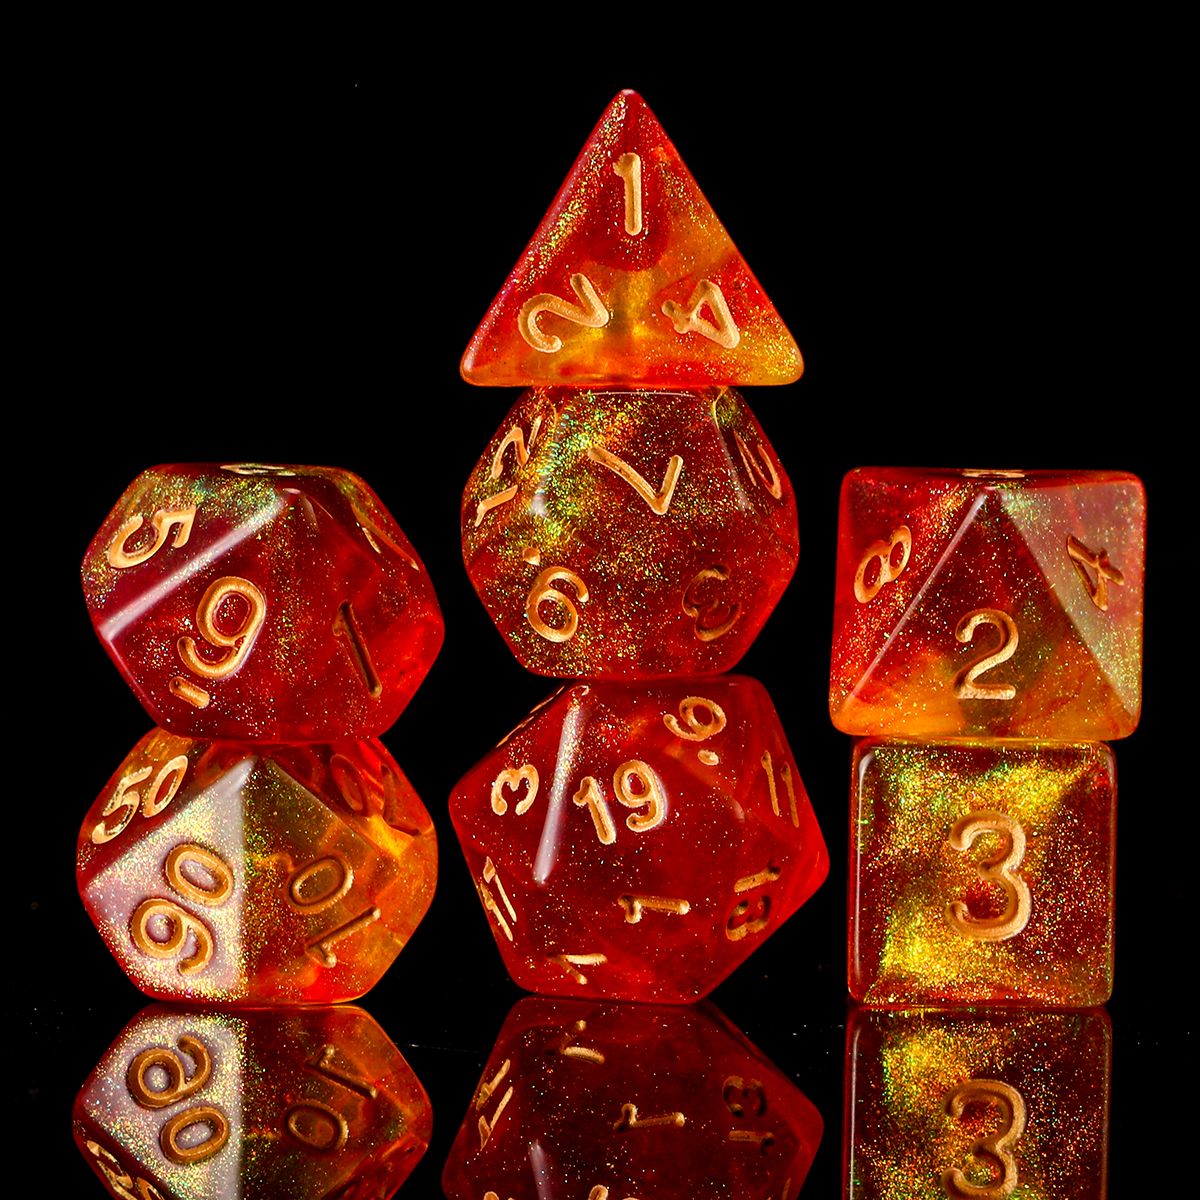 28Pcs-Galaxy-Concept-Polyhedral-Dice-Acrylic-Dices-Role-Playing-Board-Table-Game-With-Pouch-1709494